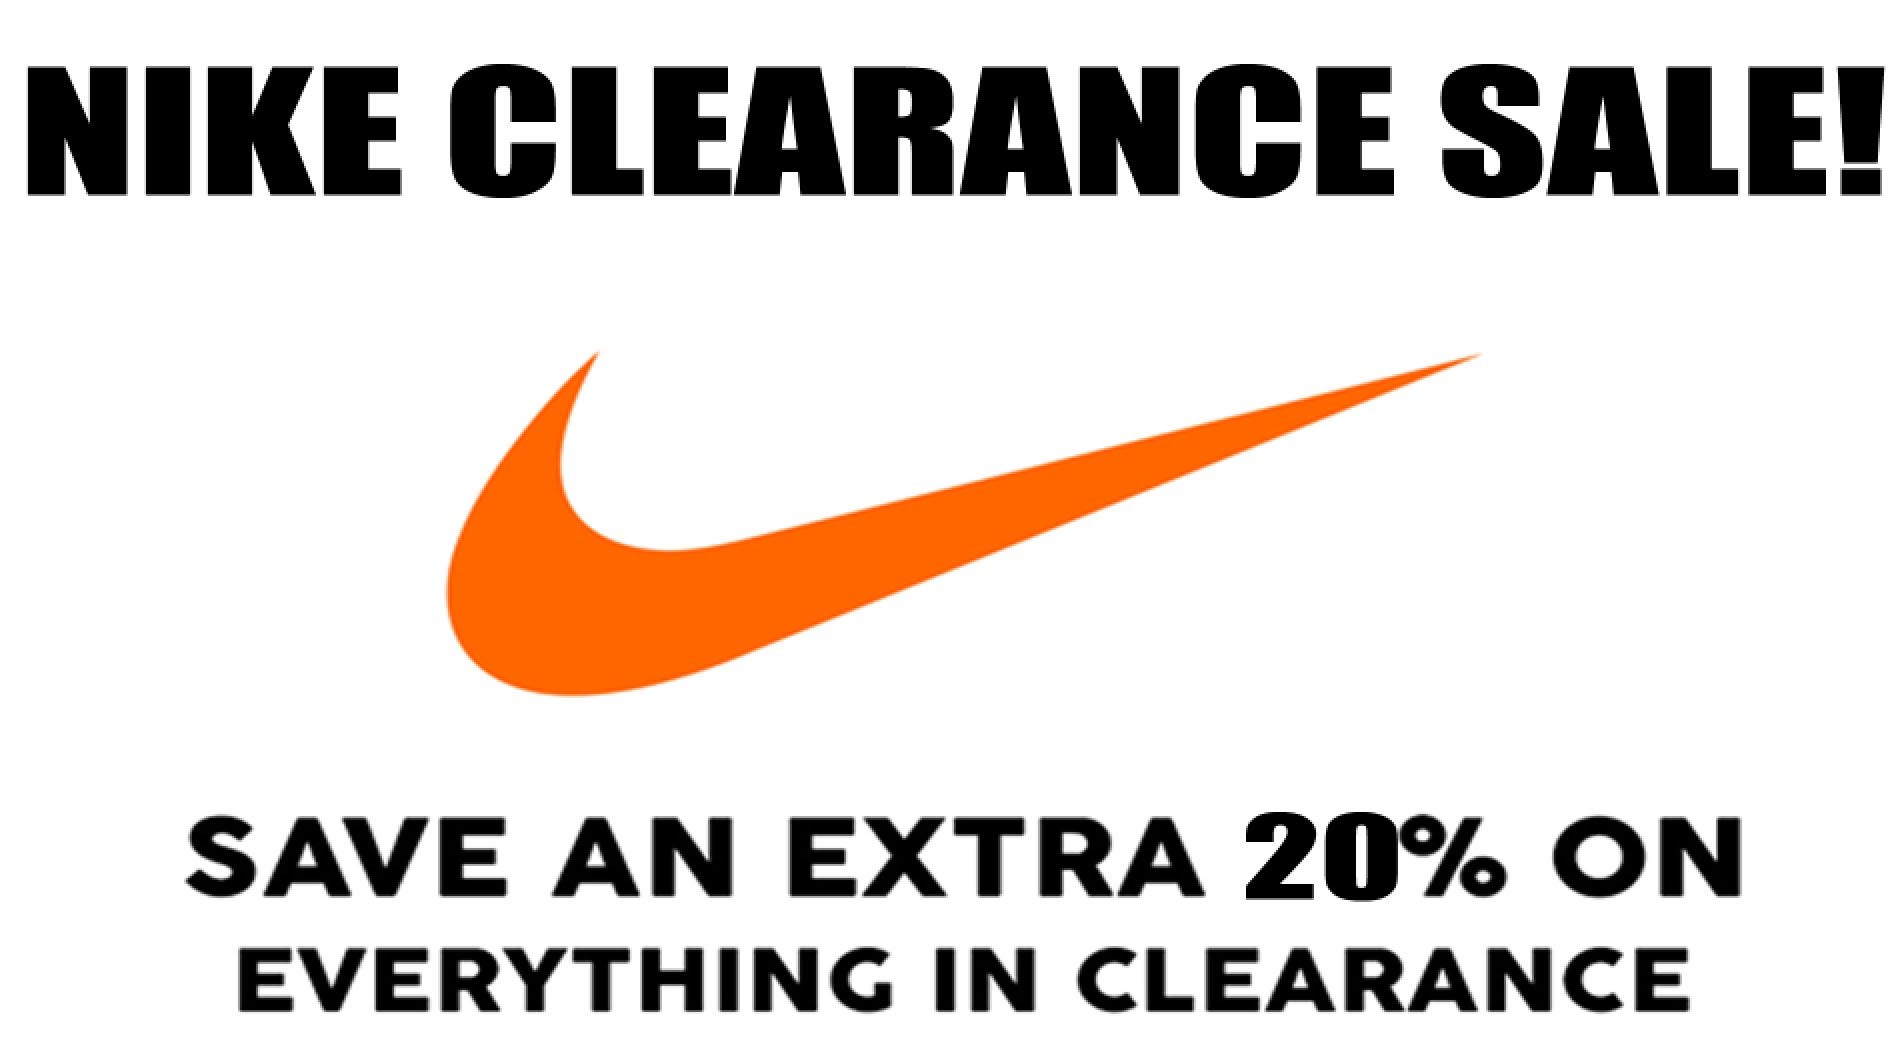 Nike Extra 20 Off Clearance Flash Sales, 56% OFF | www.smokymountains.org